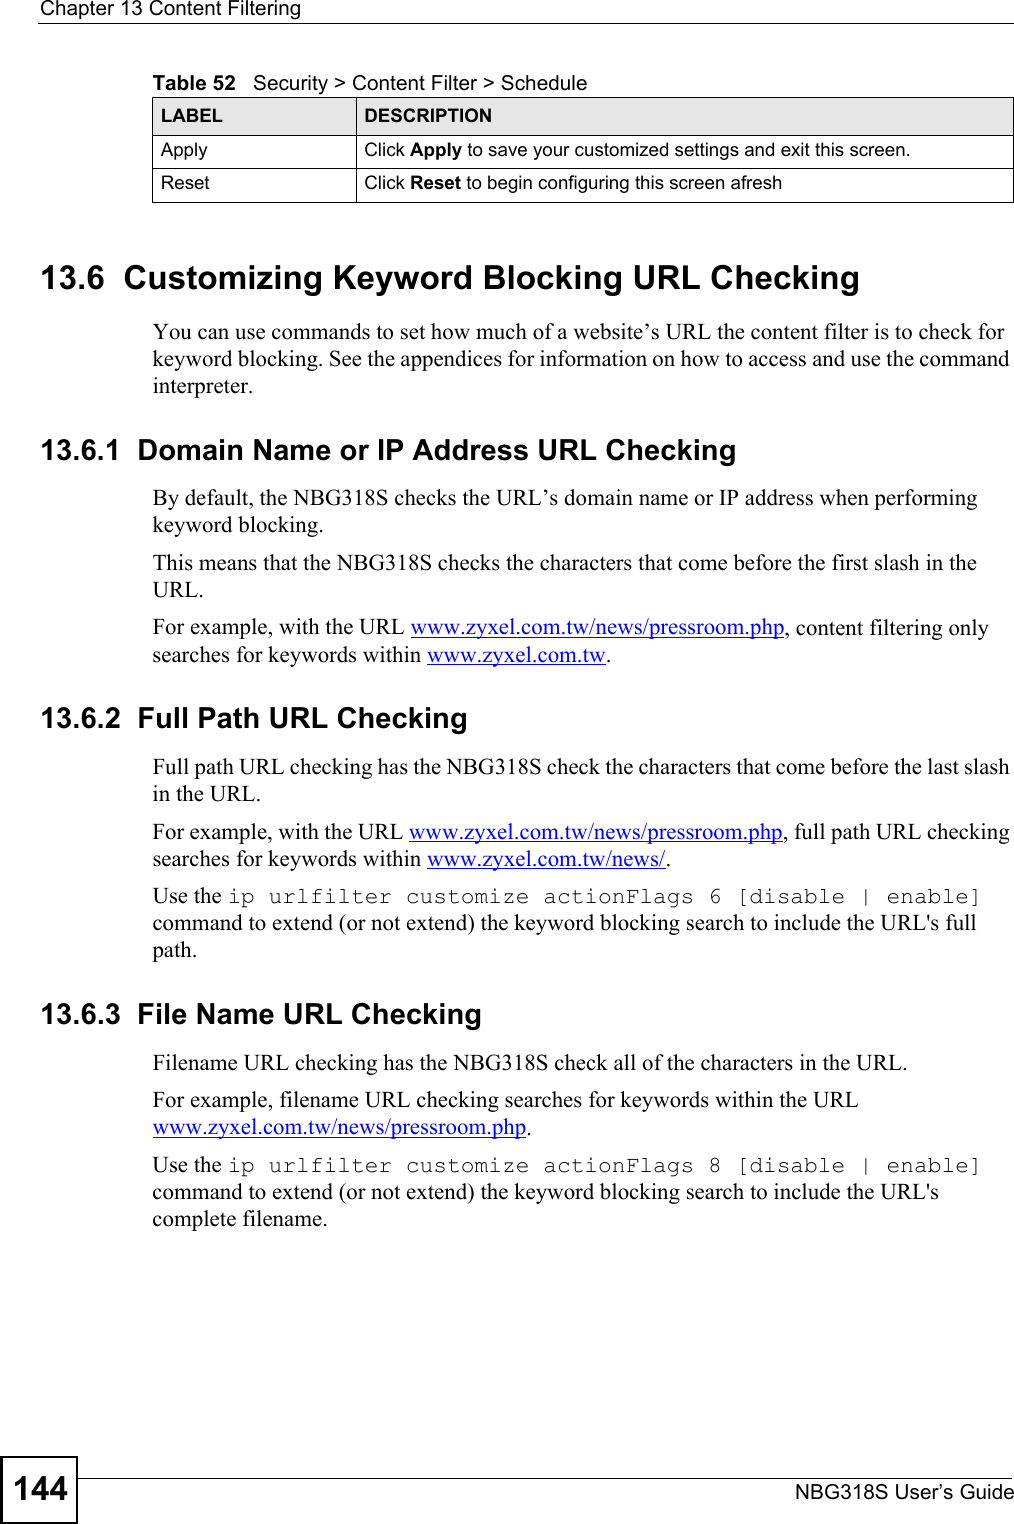 Chapter 13 Content FilteringNBG318S User’s Guide14413.6  Customizing Keyword Blocking URL CheckingYou can use commands to set how much of a website’s URL the content filter is to check for keyword blocking. See the appendices for information on how to access and use the command interpreter.13.6.1  Domain Name or IP Address URL CheckingBy default, the NBG318S checks the URL’s domain name or IP address when performing keyword blocking.This means that the NBG318S checks the characters that come before the first slash in the URL.For example, with the URL www.zyxel.com.tw/news/pressroom.php, content filtering only searches for keywords within www.zyxel.com.tw.13.6.2  Full Path URL CheckingFull path URL checking has the NBG318S check the characters that come before the last slash in the URL.For example, with the URL www.zyxel.com.tw/news/pressroom.php, full path URL checking searches for keywords within www.zyxel.com.tw/news/.Use the ip urlfilter customize actionFlags 6 [disable | enable] command to extend (or not extend) the keyword blocking search to include the URL&apos;s full path.13.6.3  File Name URL CheckingFilename URL checking has the NBG318S check all of the characters in the URL.For example, filename URL checking searches for keywords within the URL www.zyxel.com.tw/news/pressroom.php.Use the ip urlfilter customize actionFlags 8 [disable | enable] command to extend (or not extend) the keyword blocking search to include the URL&apos;s complete filename.Apply Click Apply to save your customized settings and exit this screen.Reset Click Reset to begin configuring this screen afreshTable 52   Security &gt; Content Filter &gt; ScheduleLABEL DESCRIPTION